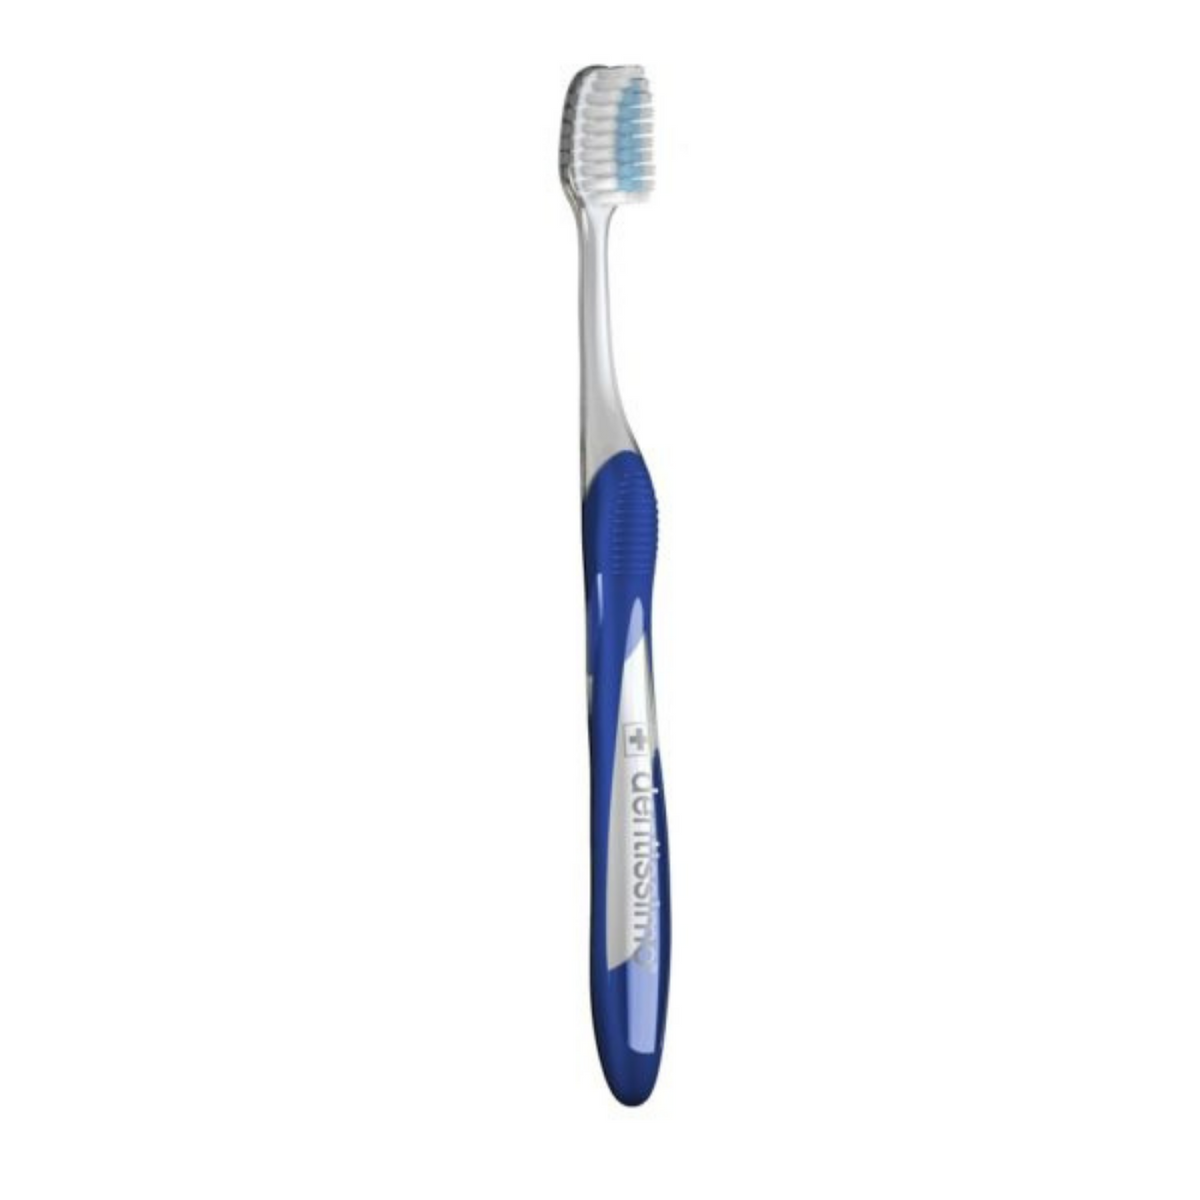 Primary Image of Sensitive Soft Toothbrush